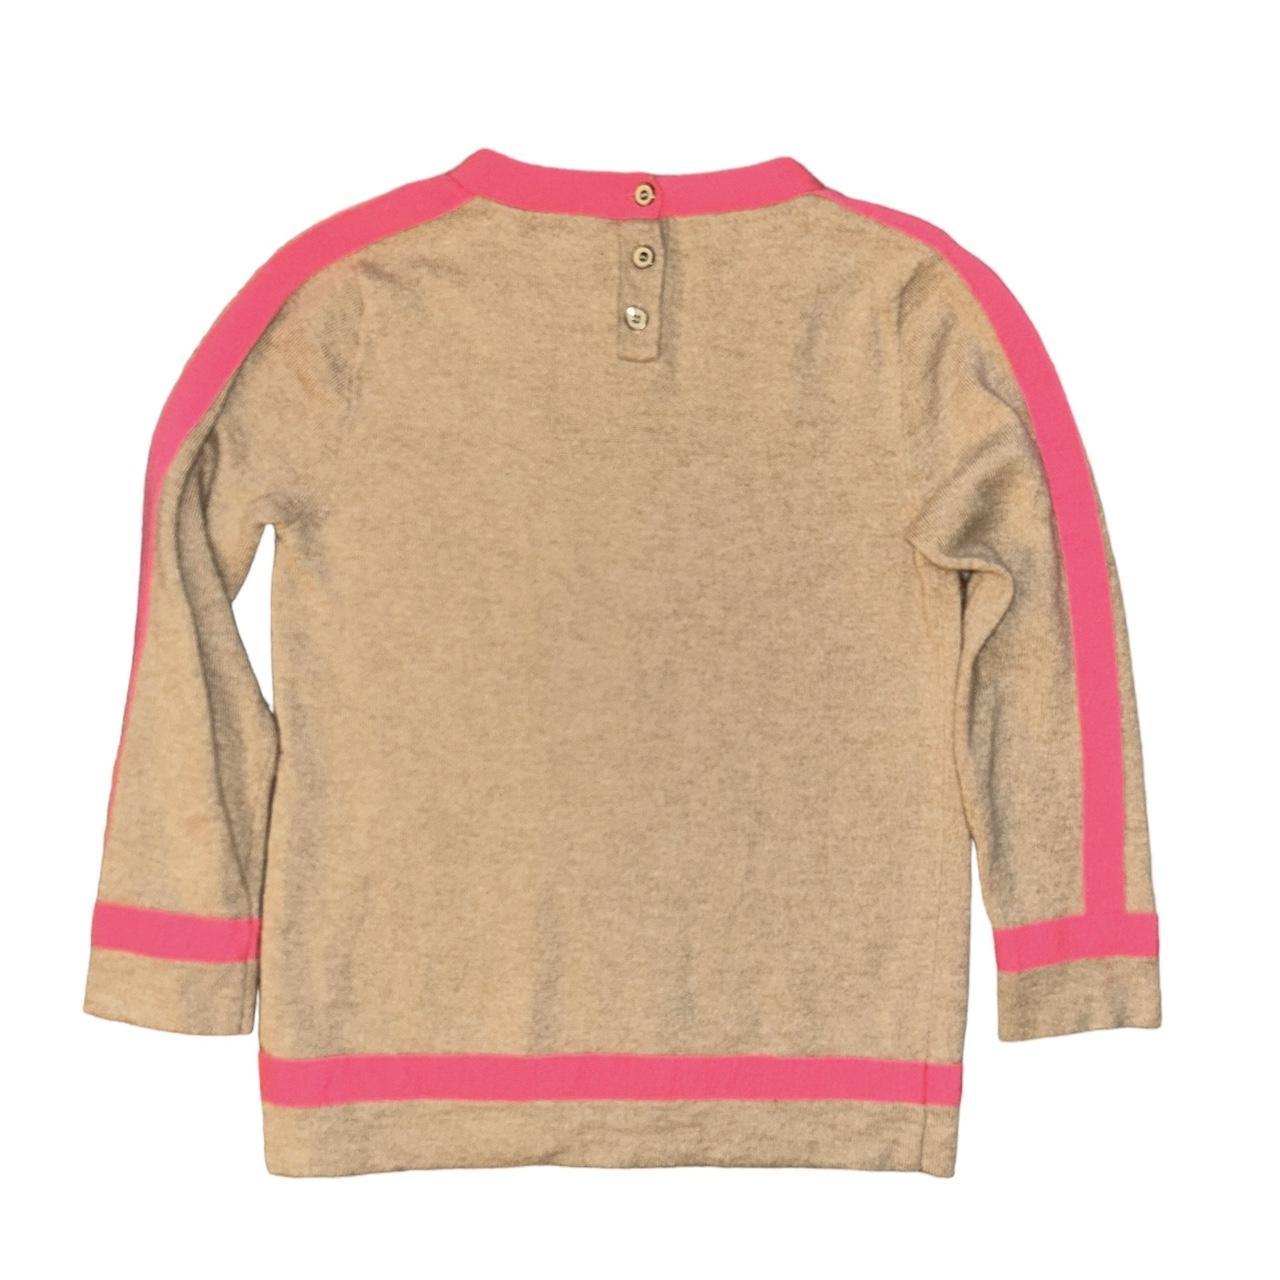 Crewcuts by J.Crew Tan and Pink Jumper (2)